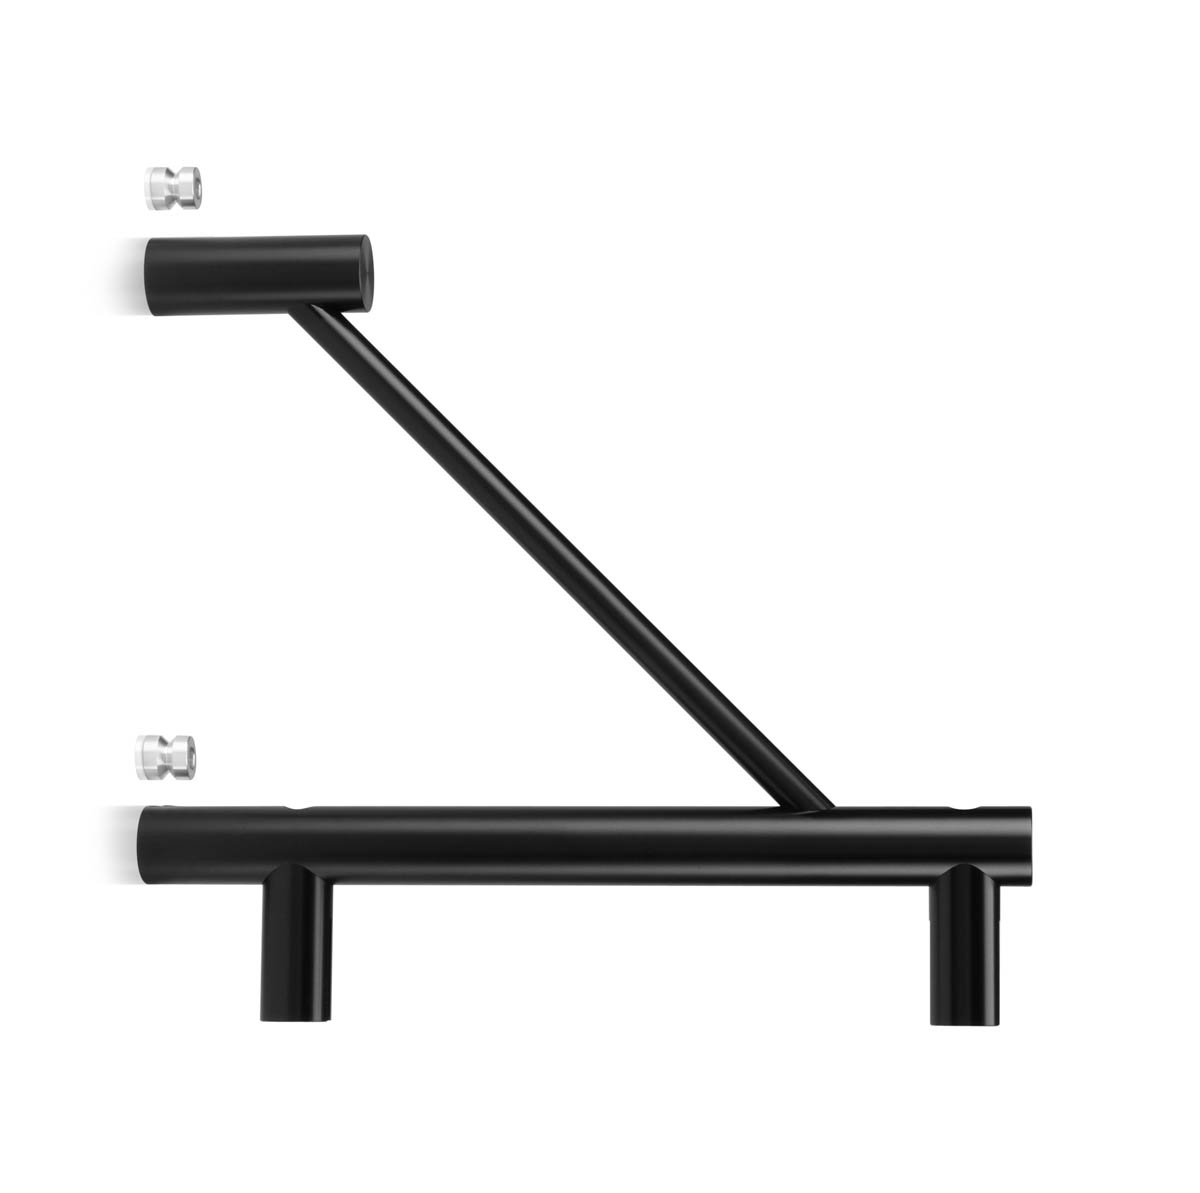 Aluminum Flag Sign Bracket Only, Matte Black Anodized Finish. 1/4'' Thickness Material Accepted, 7-7/8 Length, 3/4'' Diameter. (Sold Without Panel, Bracket Only)